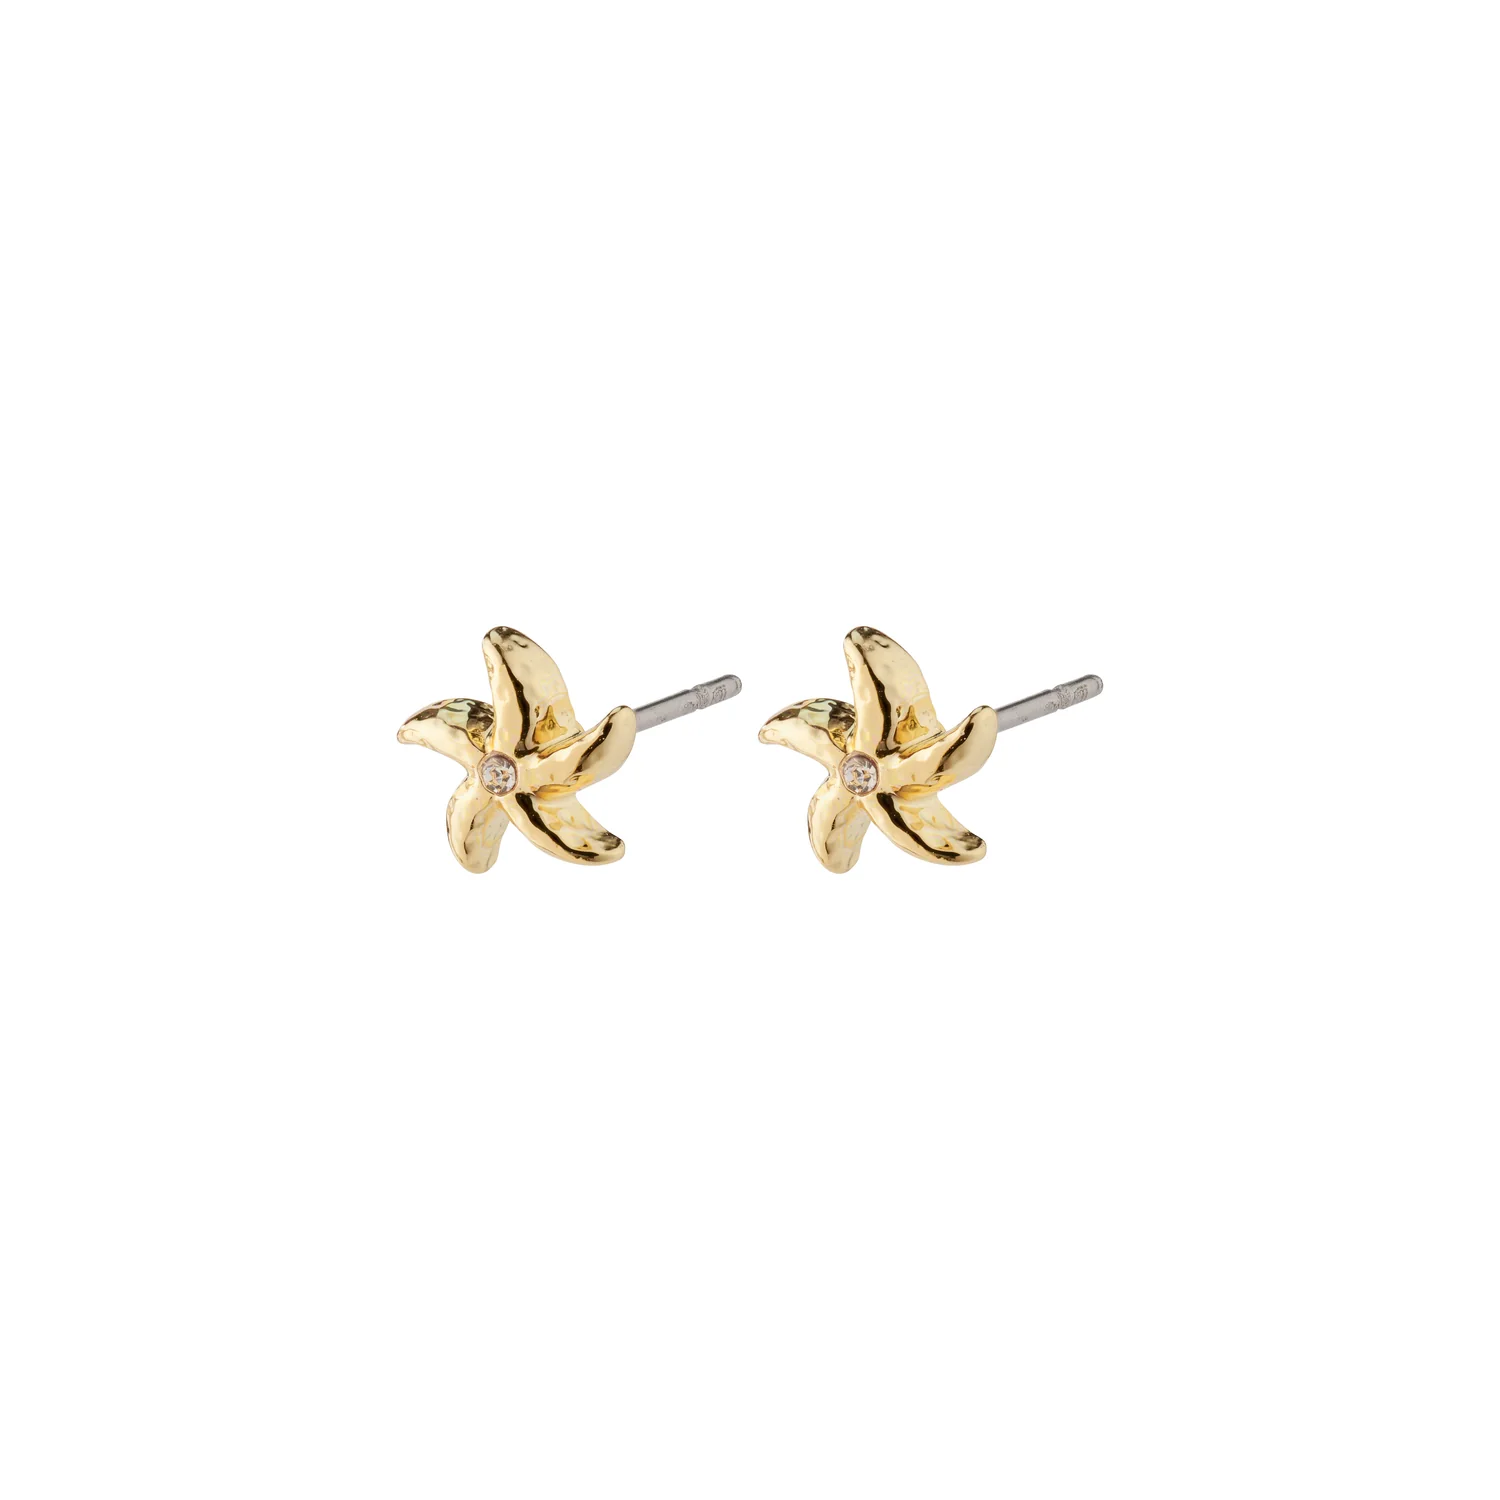 Pilgrim Oakley Recycled Starfish Earrings - Gold Accessories - Jewelry - Earrings by Pilgrim | Grace the Boutique